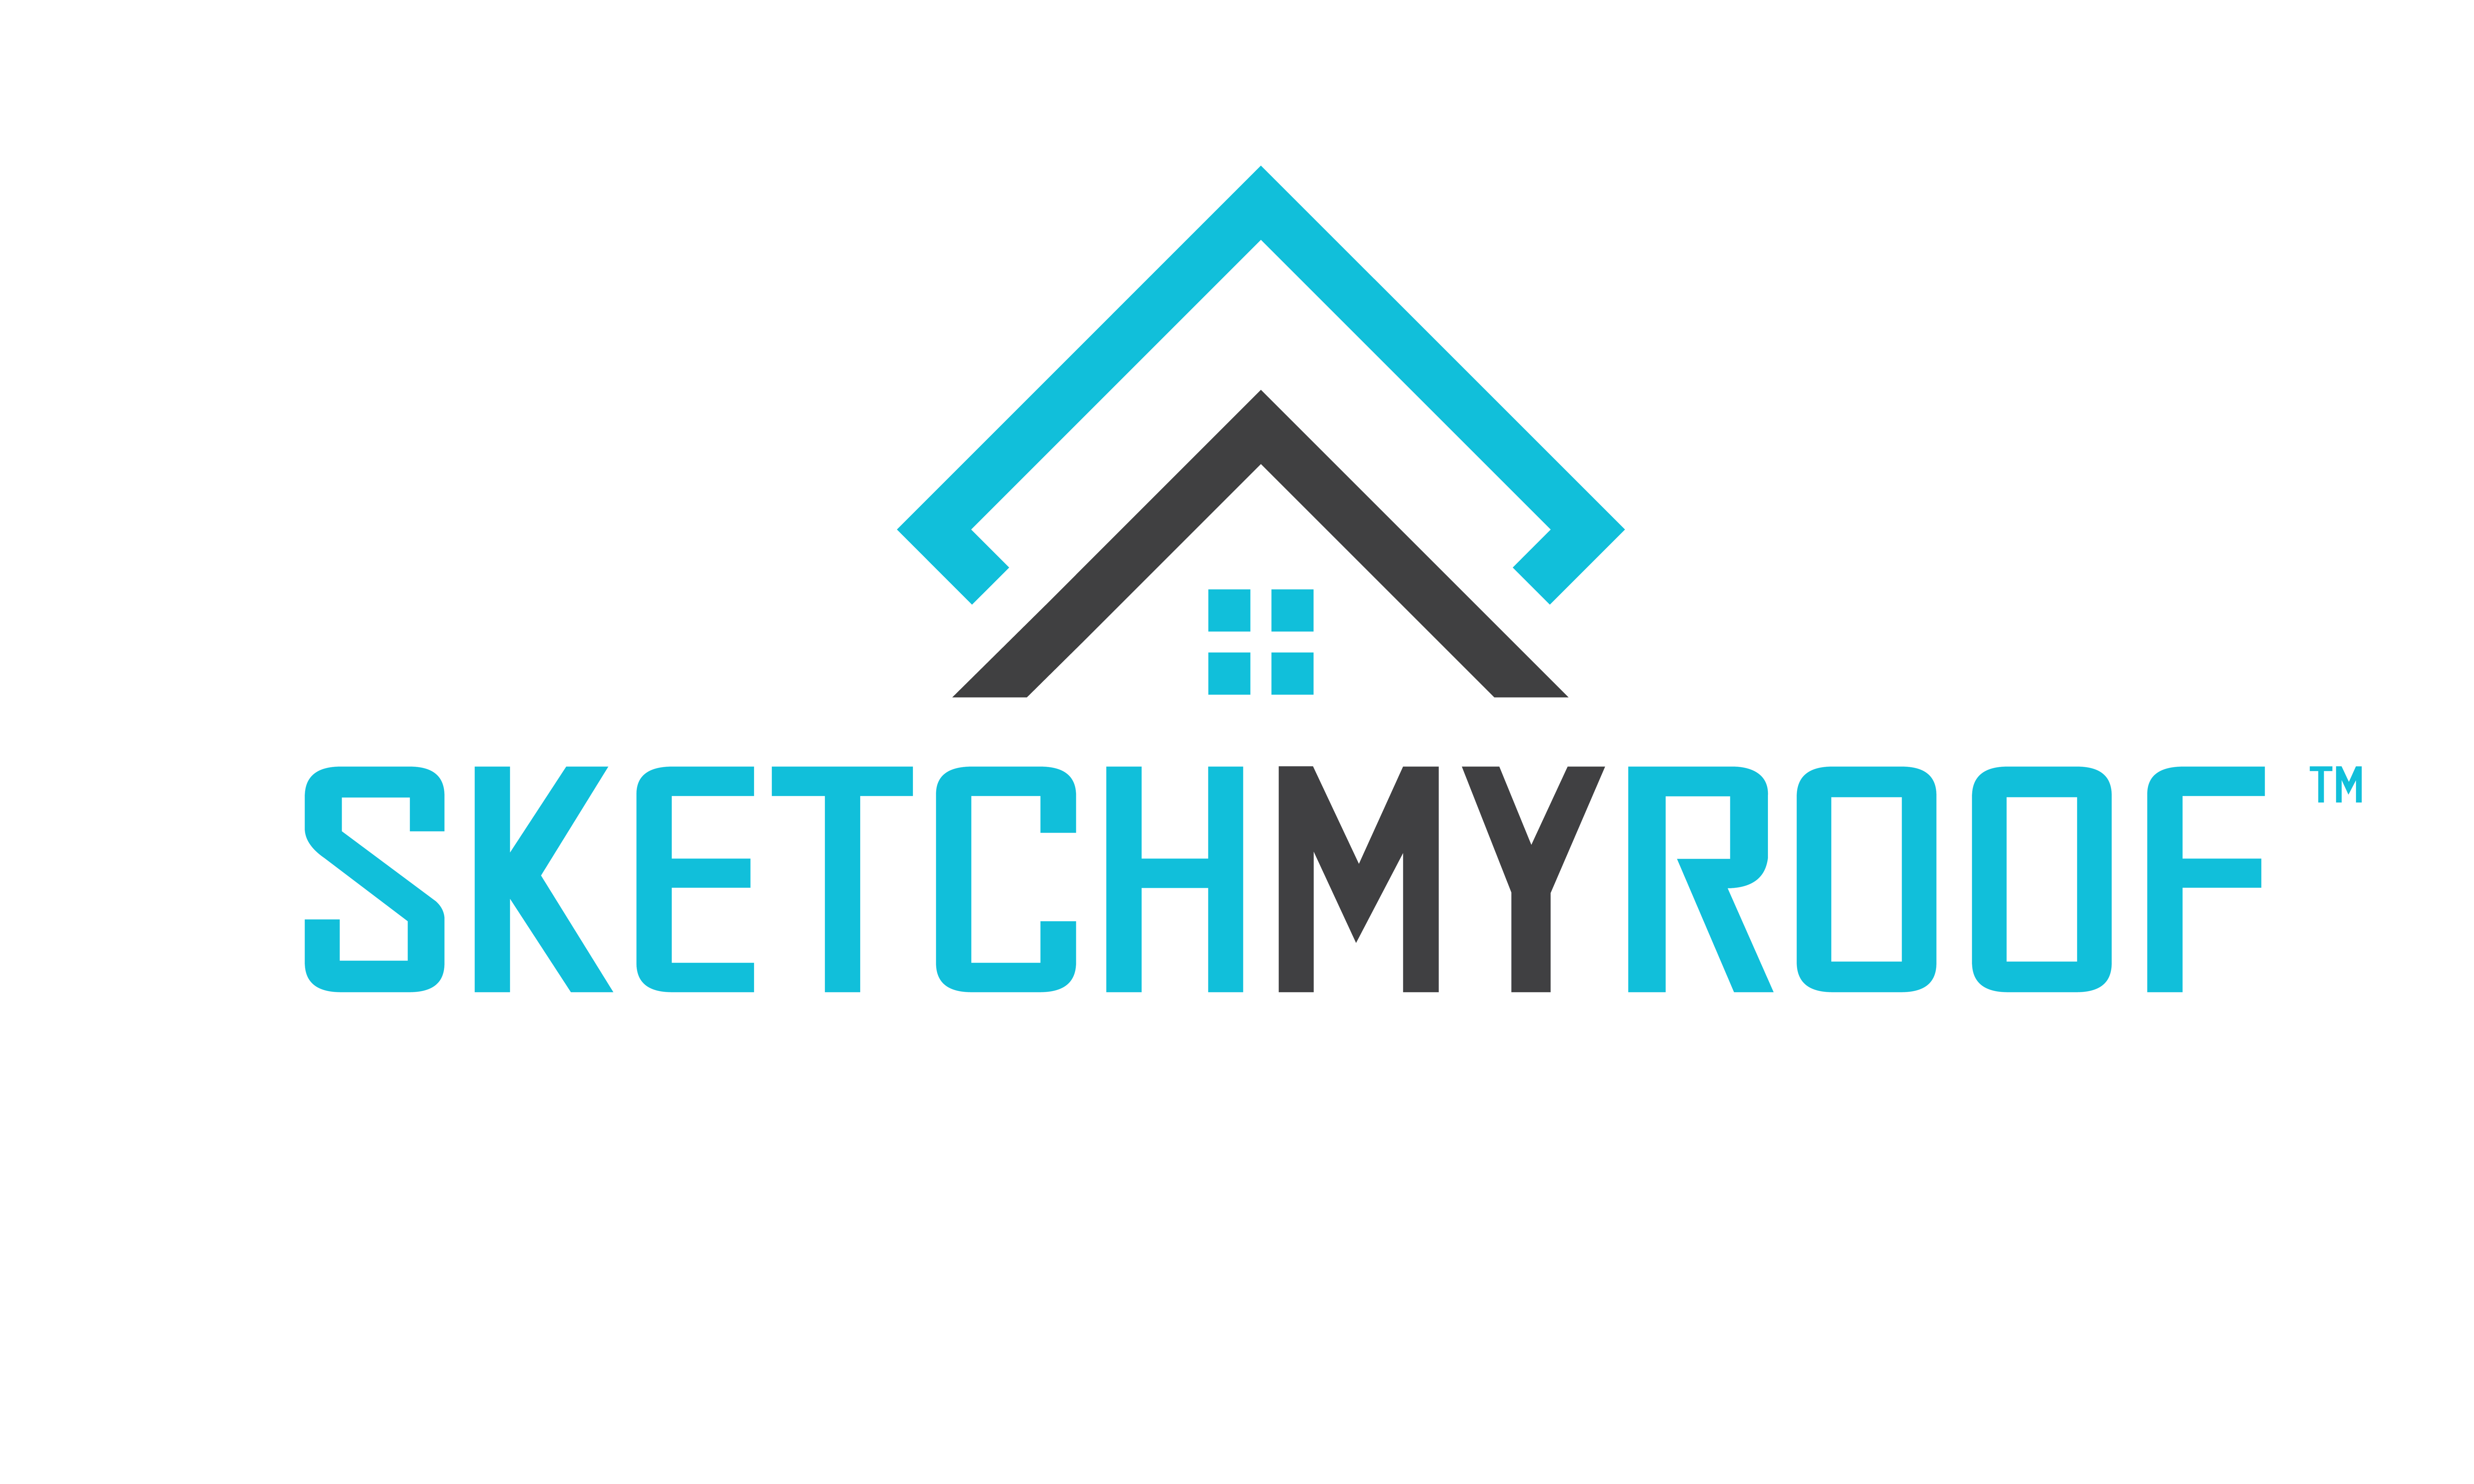 Sketch My Roof